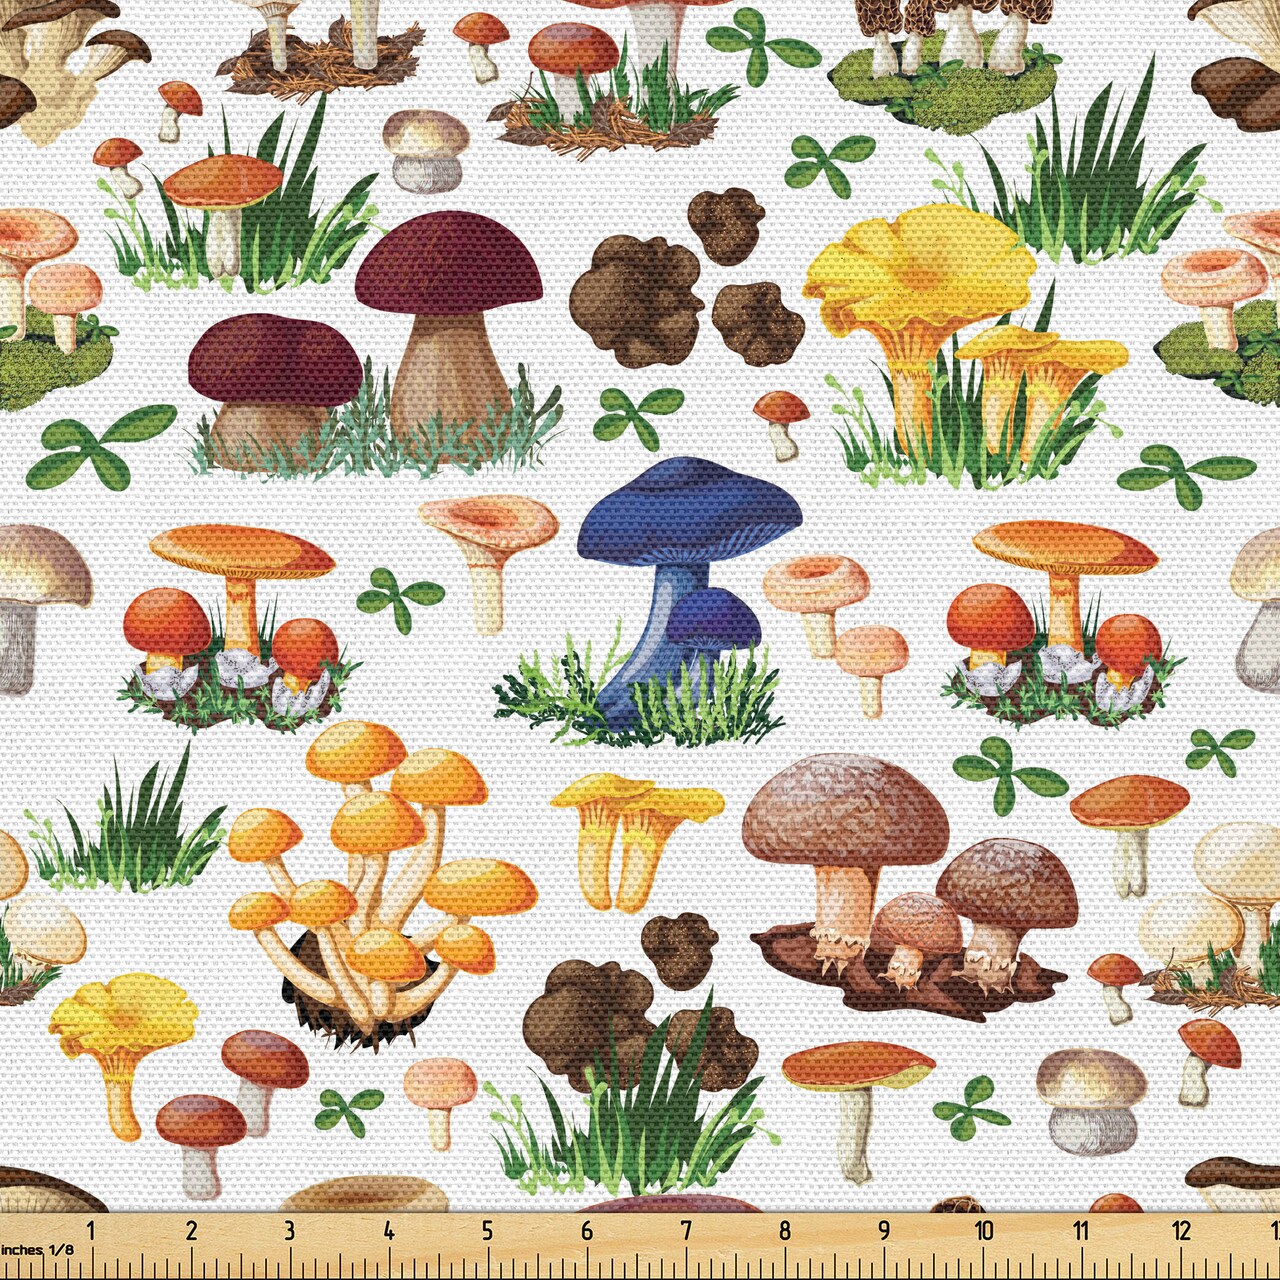 Ambesonne Mushroom Fabric by the Yard, Pattern Types of Mushrooms Wild Species Natural Organic Food Garden Theme, Decorative Fabric for Upholstery and Home Accents, 5 Yards, White Yellow